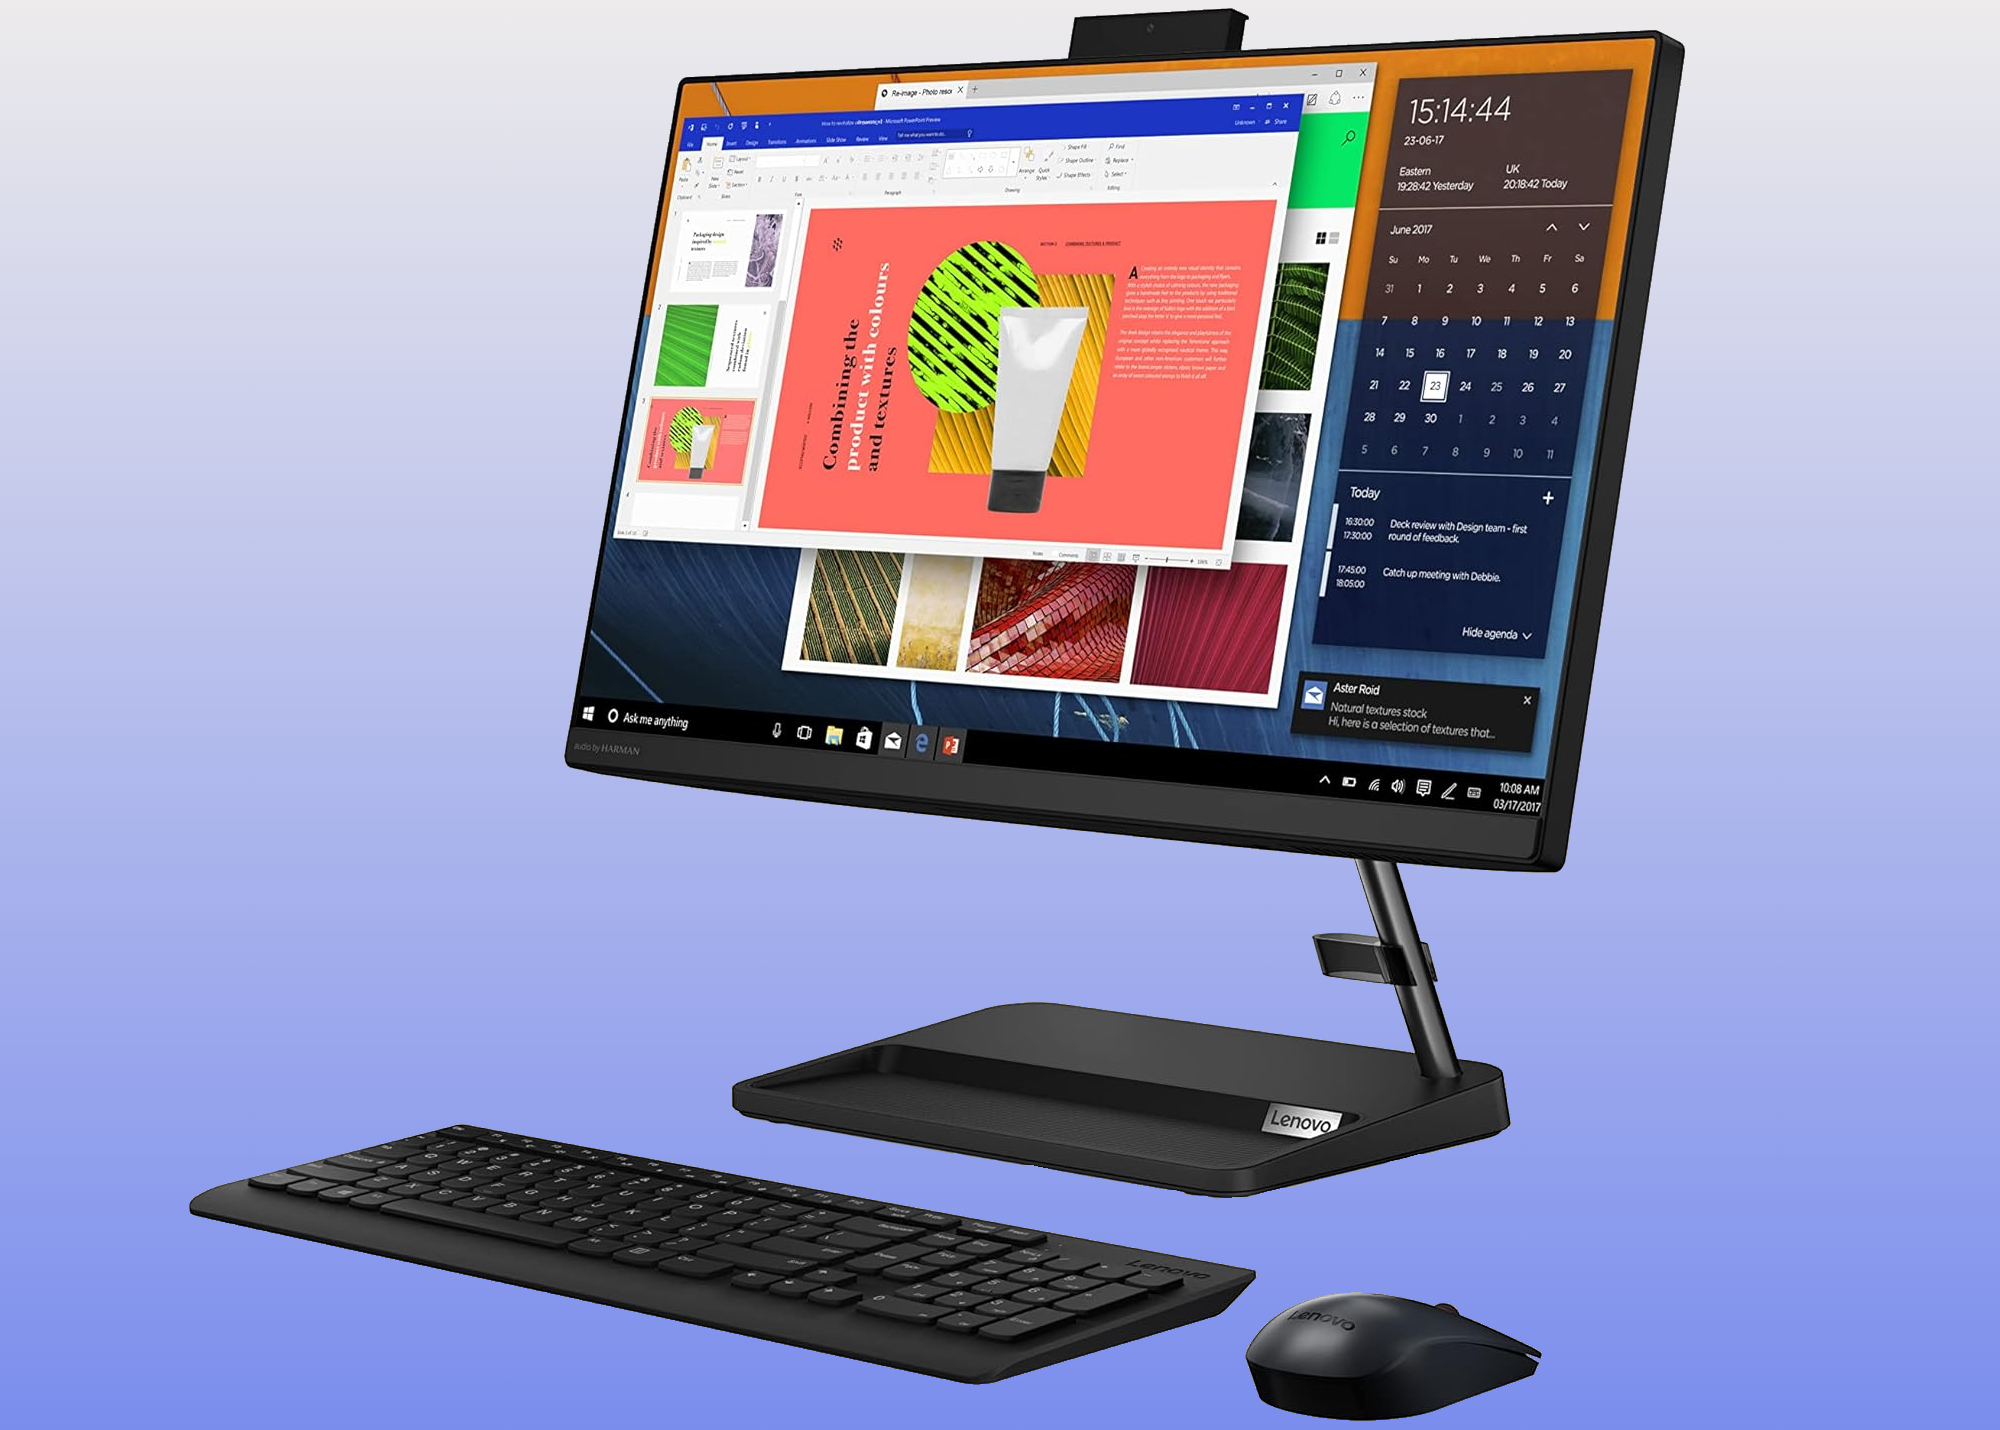 Lenovo IdeaCentre AIO 3i all in one desktop computer with keyboard and mouse